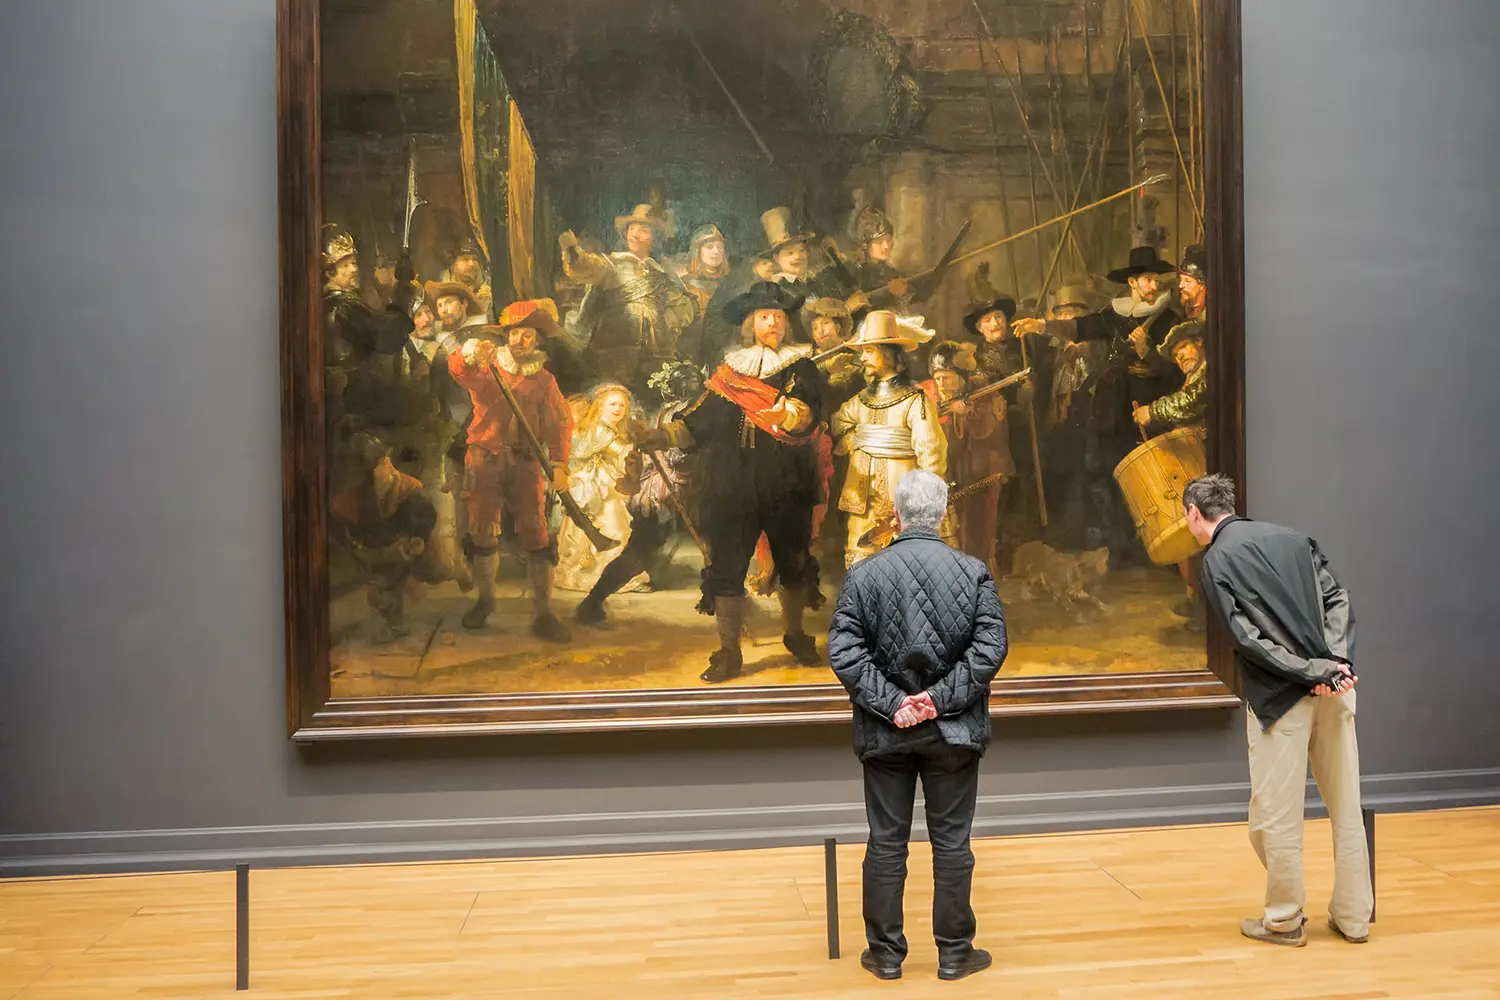 Tourists in one of the rooms of national Rijksmuseum scrutinize the world famous Nightwatch painting by Rembrandt